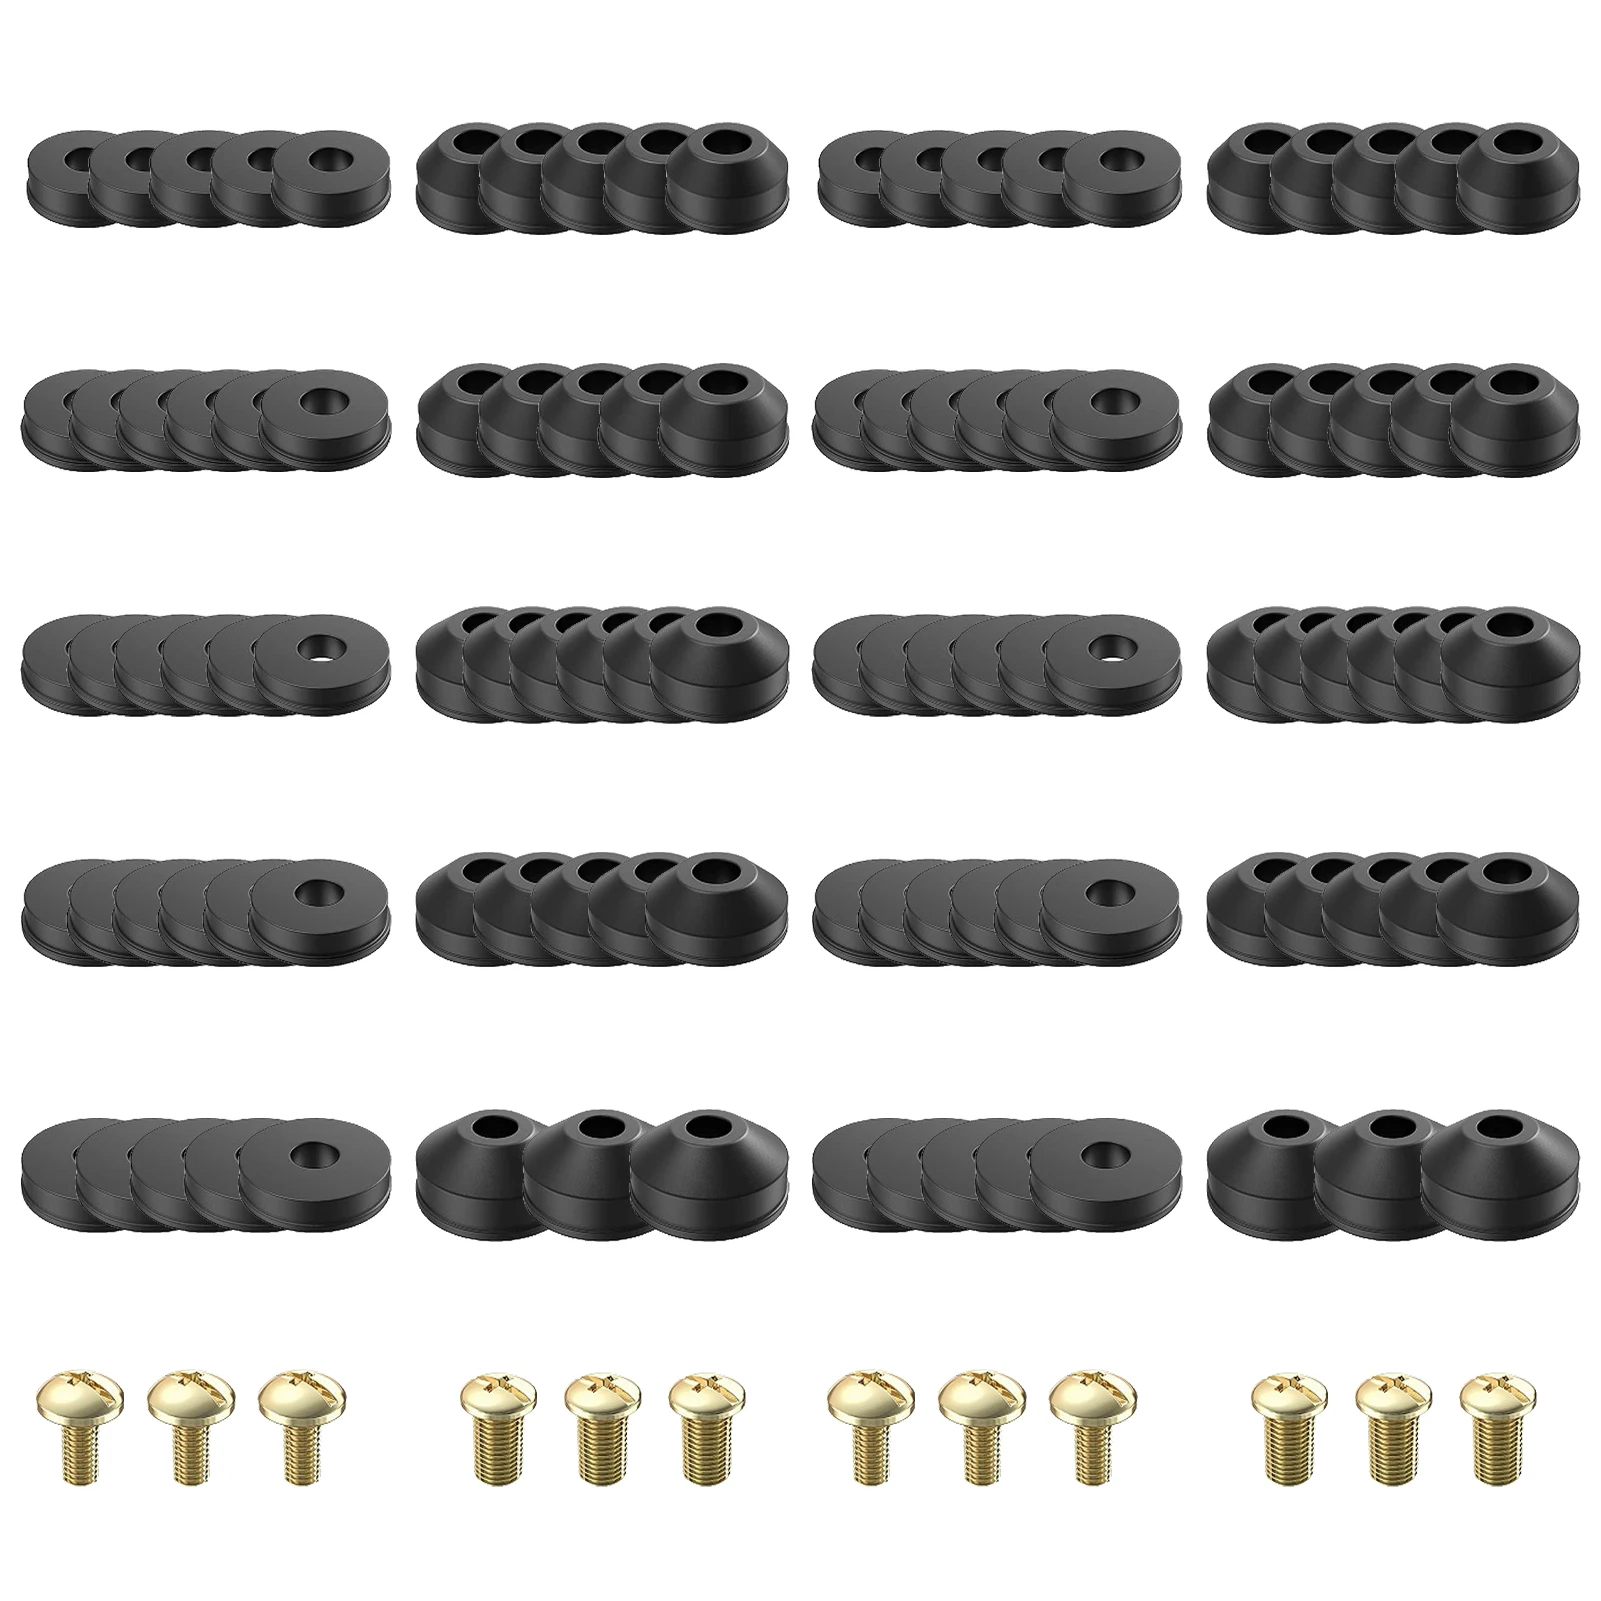 

116pcs Reliable For Repairing Beveled Faucet Washers Replacements Brass Bibb Flat With Screws Proof Leak Durable Practical